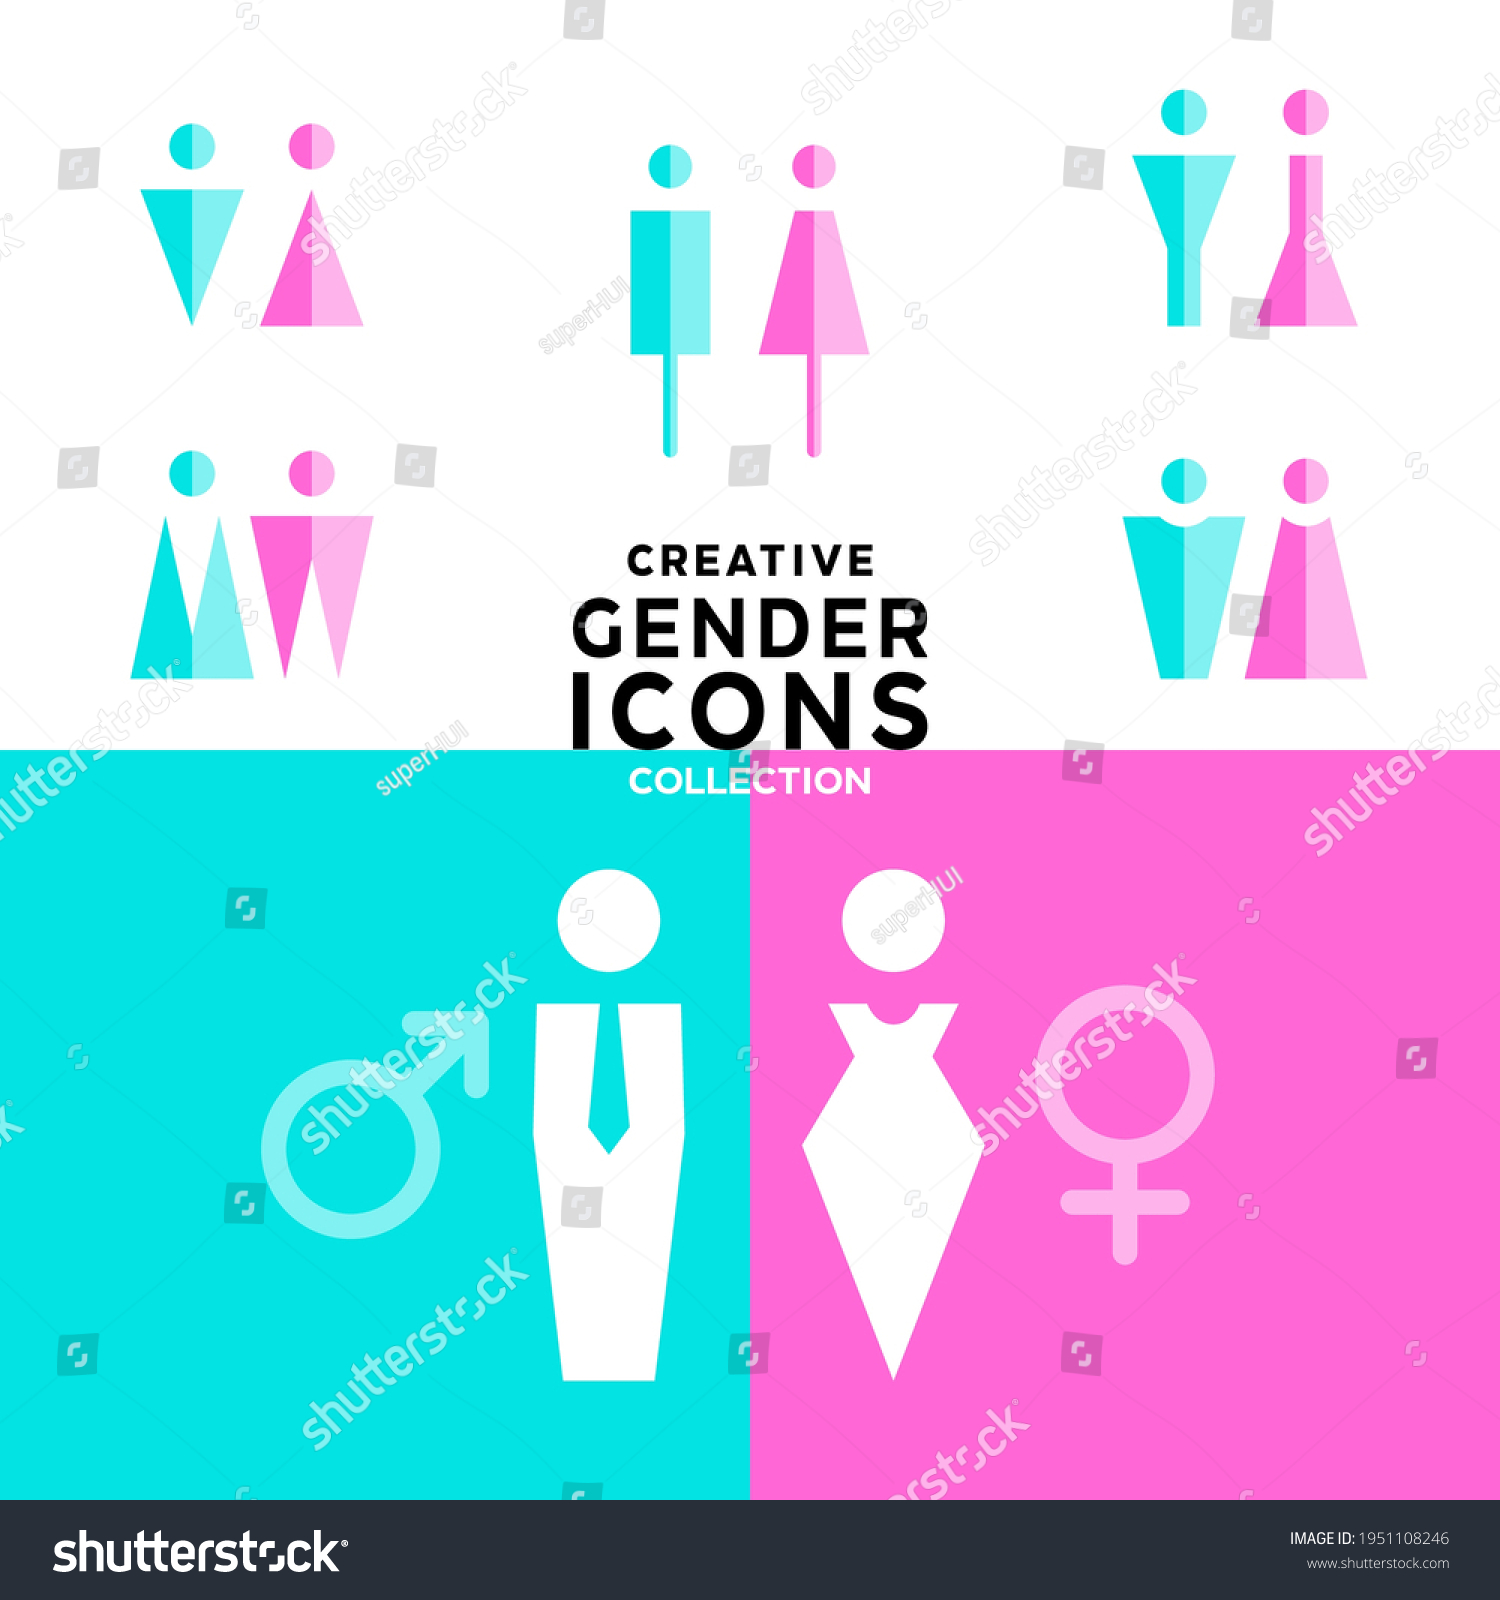 Gender Icons Set People Pictograms Lady Stock Vector Royalty Free